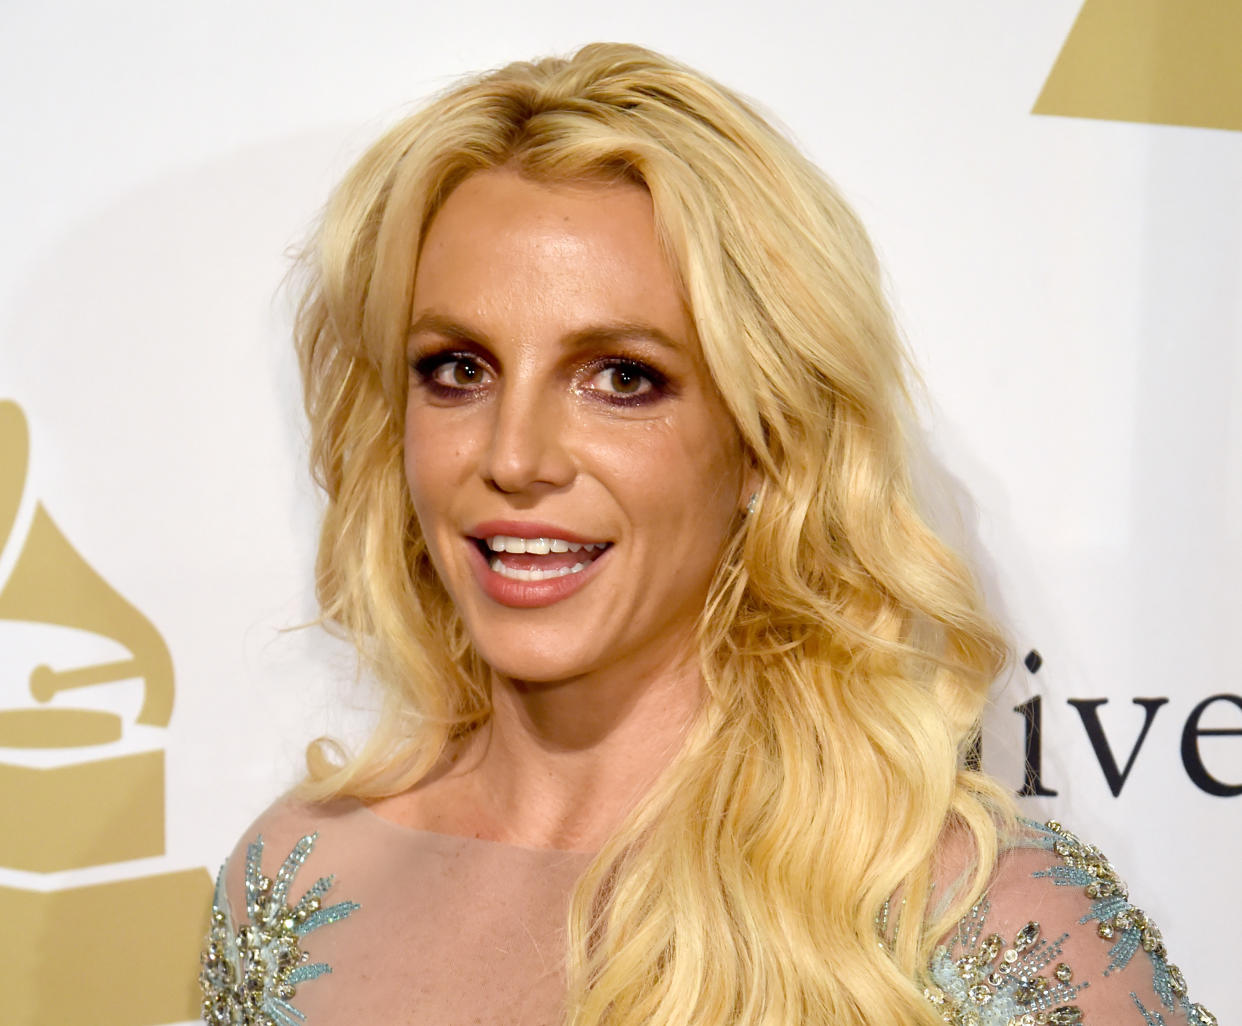 Britney Spears was almost attacked by a fan who rushed the stage, and the video is so stressful